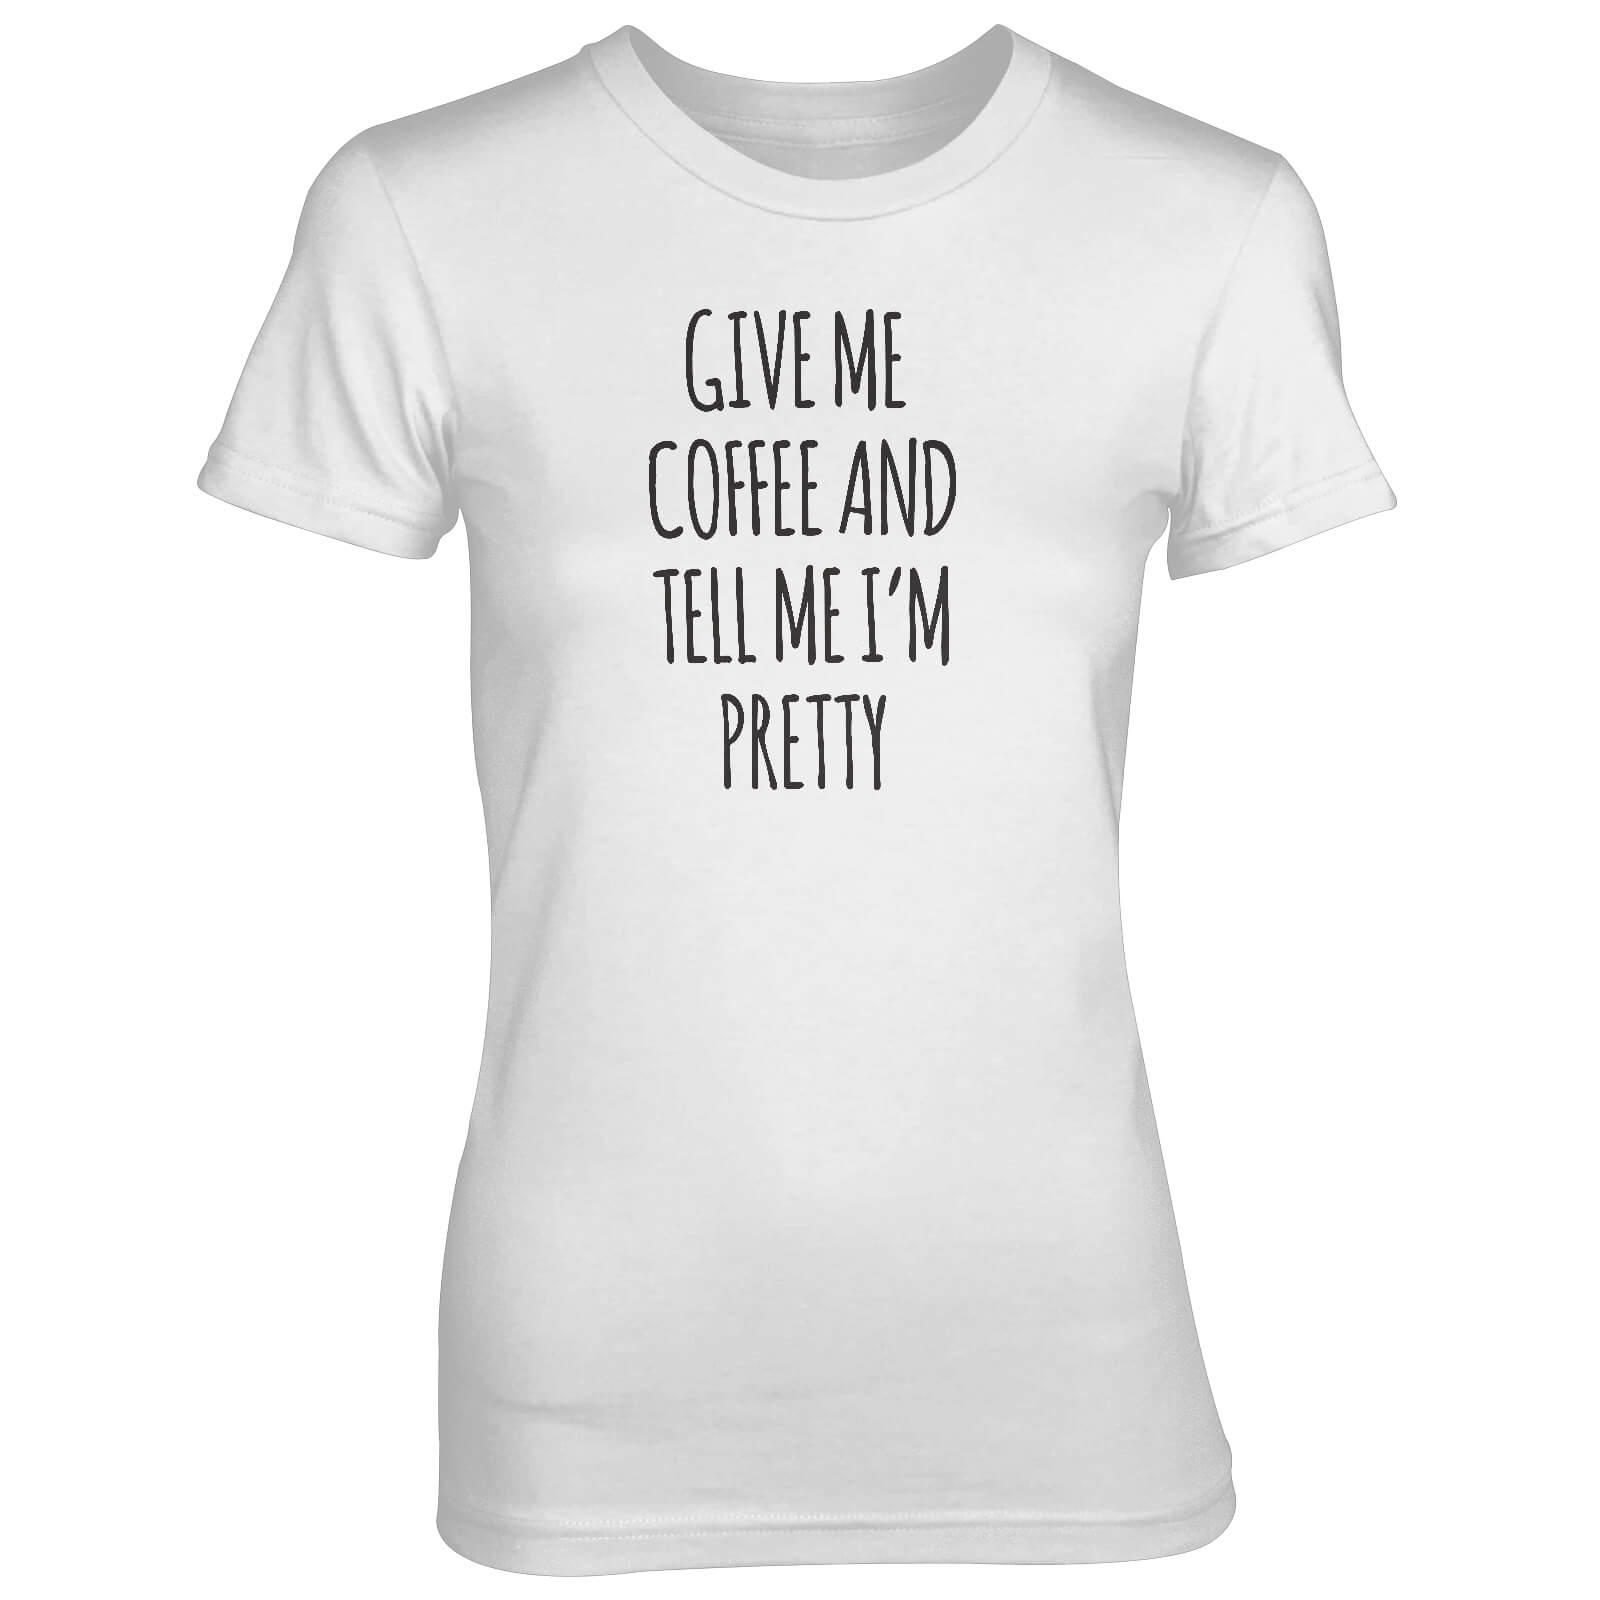 Give Me Coffee And Tell Me I'm Pretty Women's White T-Shirt - S - White